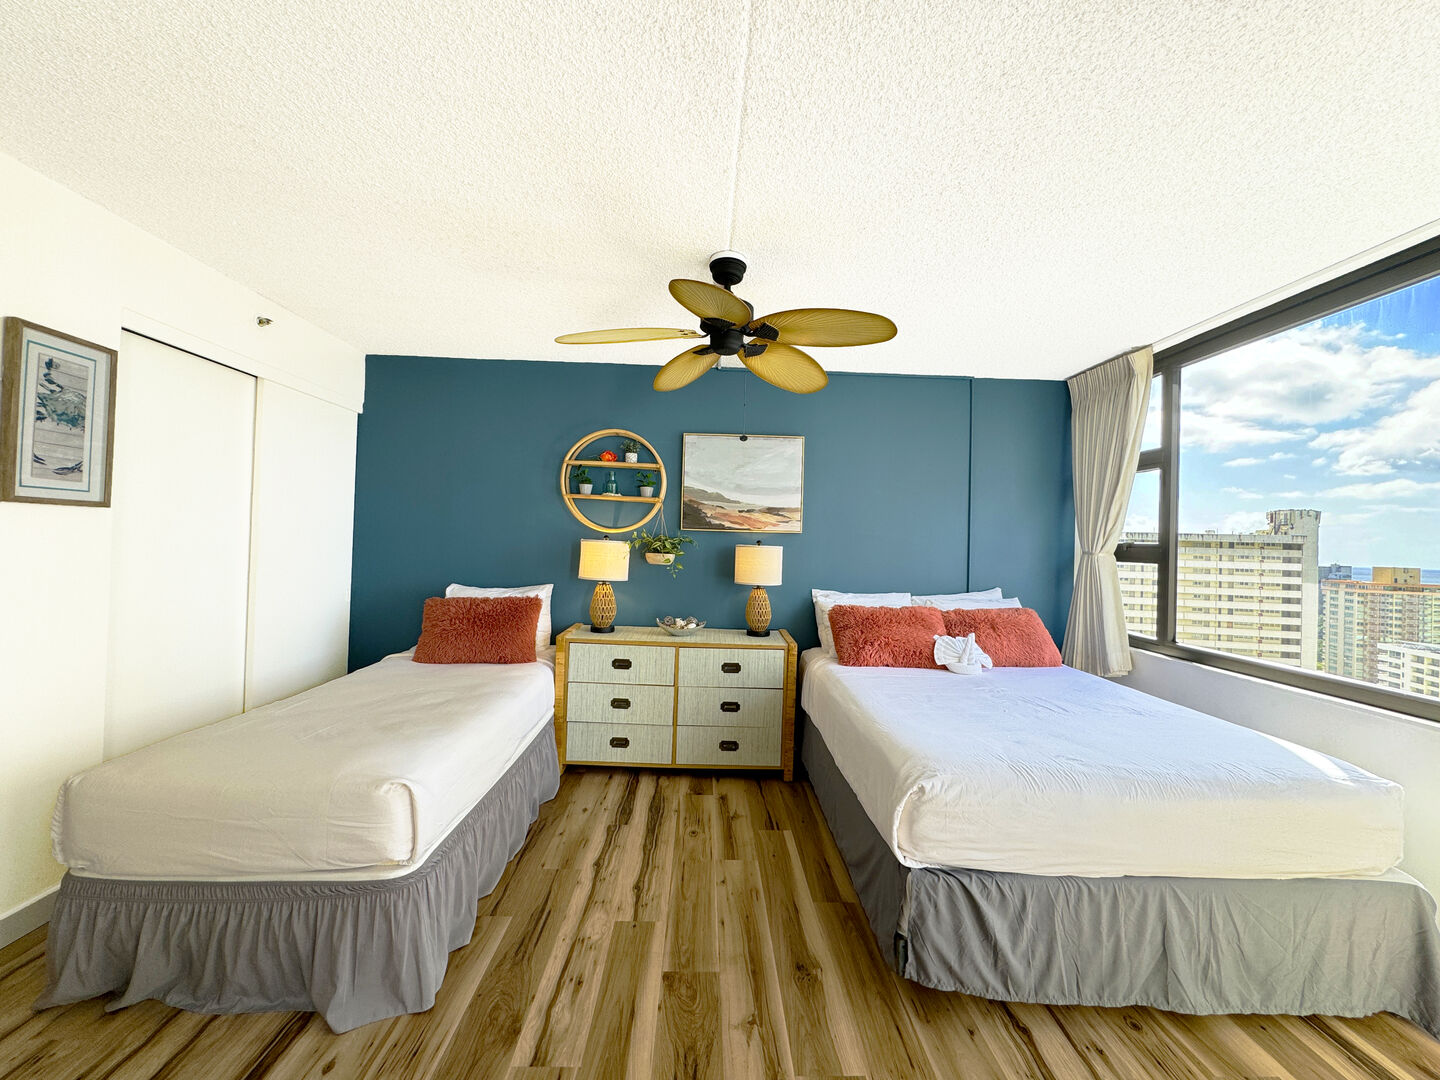 Bedroom with 1 queen-size and 1 twin-size bed, and fan.